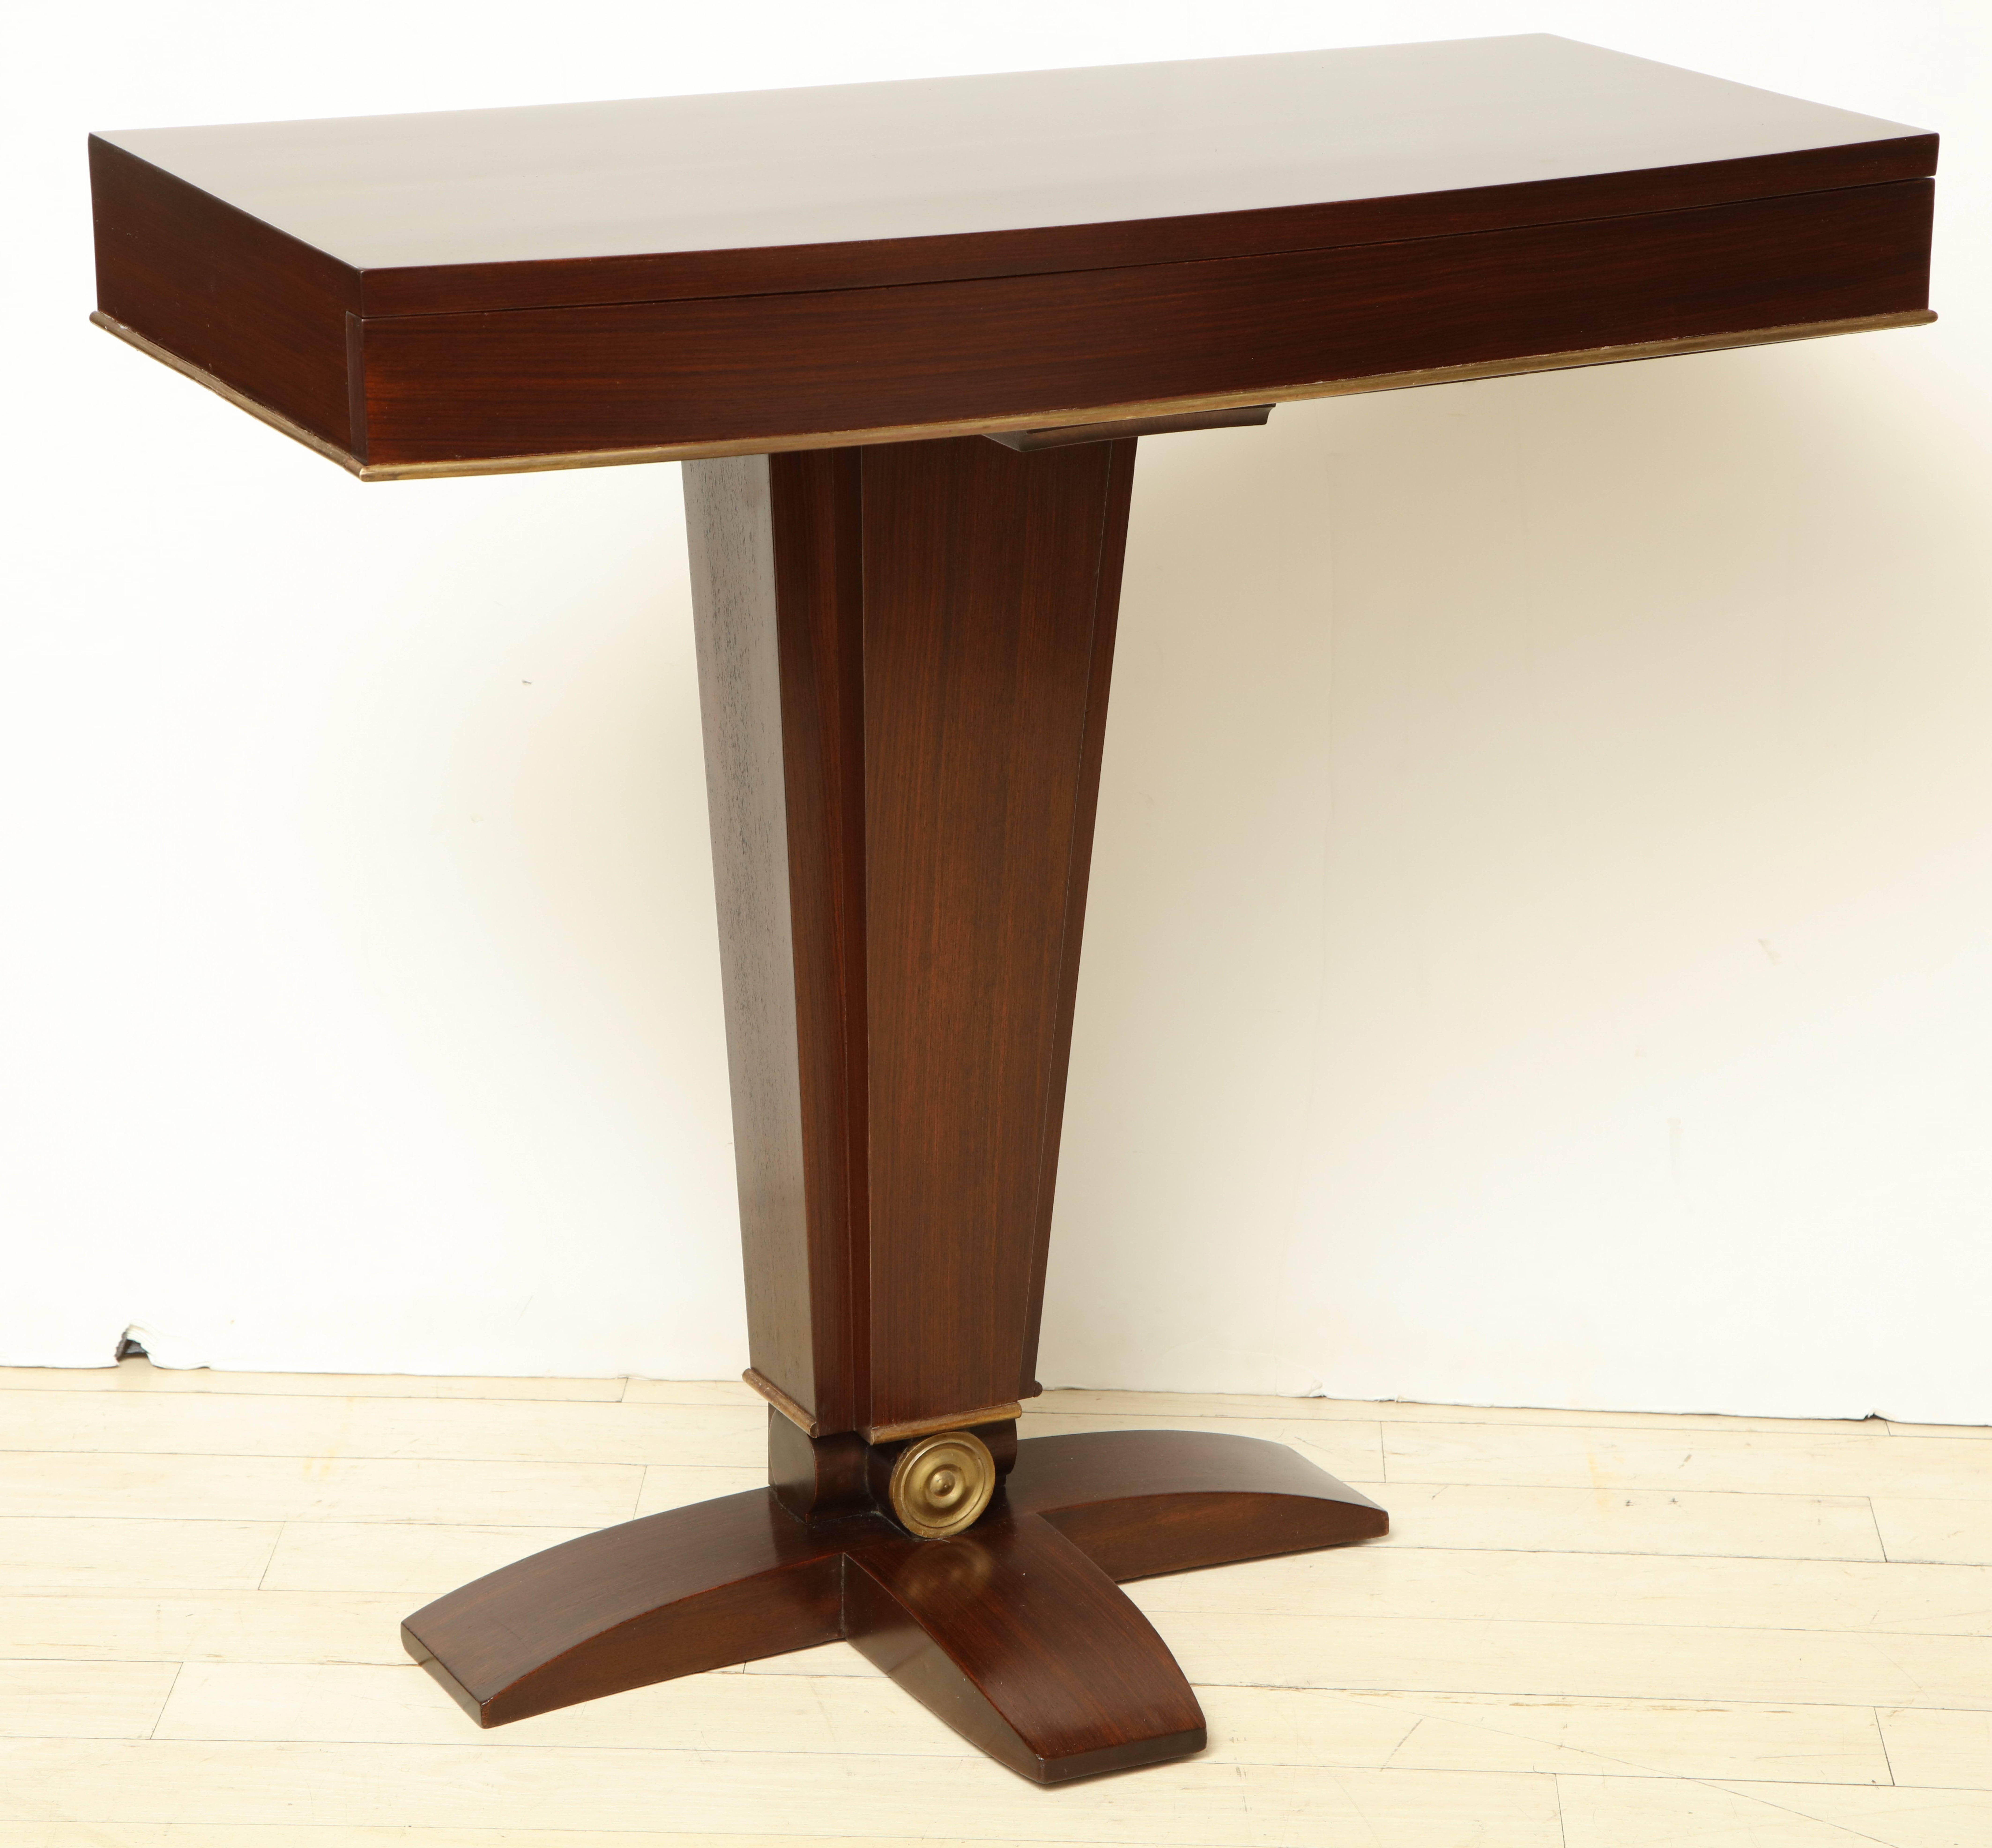 Rosewood Art Deco console table with brass trim, on tripod pedestal base and frieze drawer.



Available to see in our NYC Showroom 
BK Antiques
306 East 61st St. 2nd fl.
New York, NY 10065